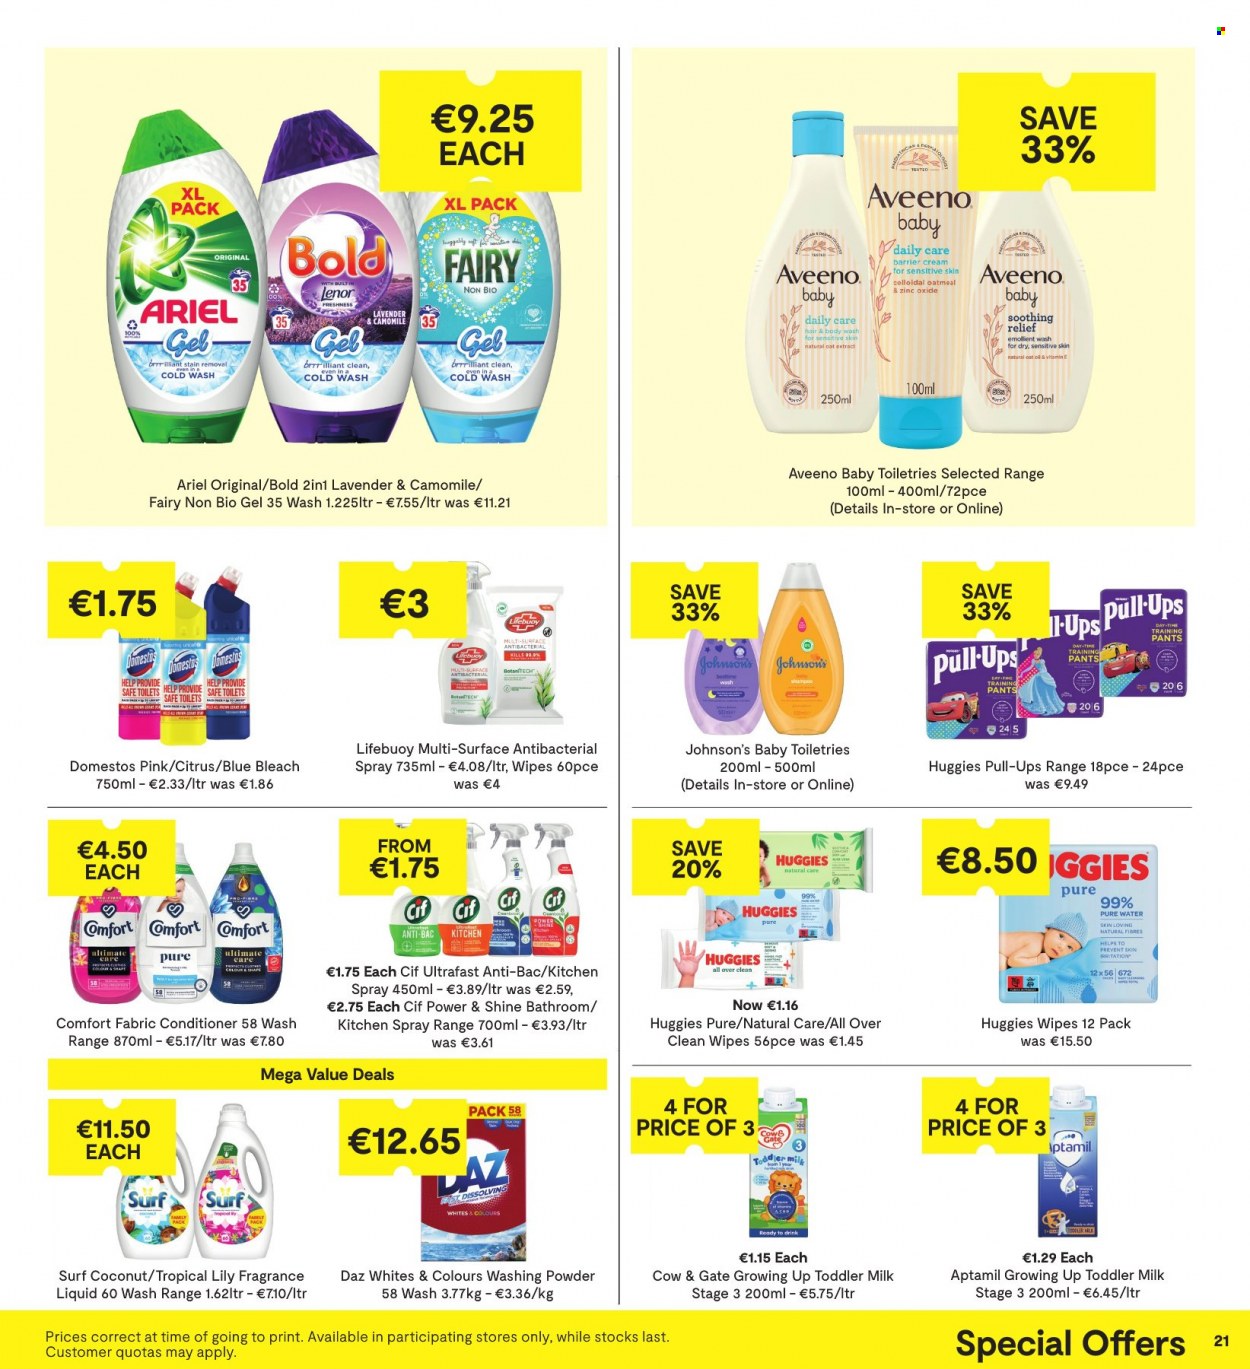 thumbnail - SuperValu offer  - 09.03.2023 - 22.03.2023 - Sales products - coconut, milk, oatmeal, oats, purified water, water, wipes, Huggies, pants, Johnson's, baby pants, Aveeno, Domestos, bleach, Fairy, Cif, Ariel, laundry powder, Surf, Daz Powder, Lenor, Comfort softener, body wash, hair & body wash, Lifebuoy, fragrance, antibacterial spray, zinc. Page 22.